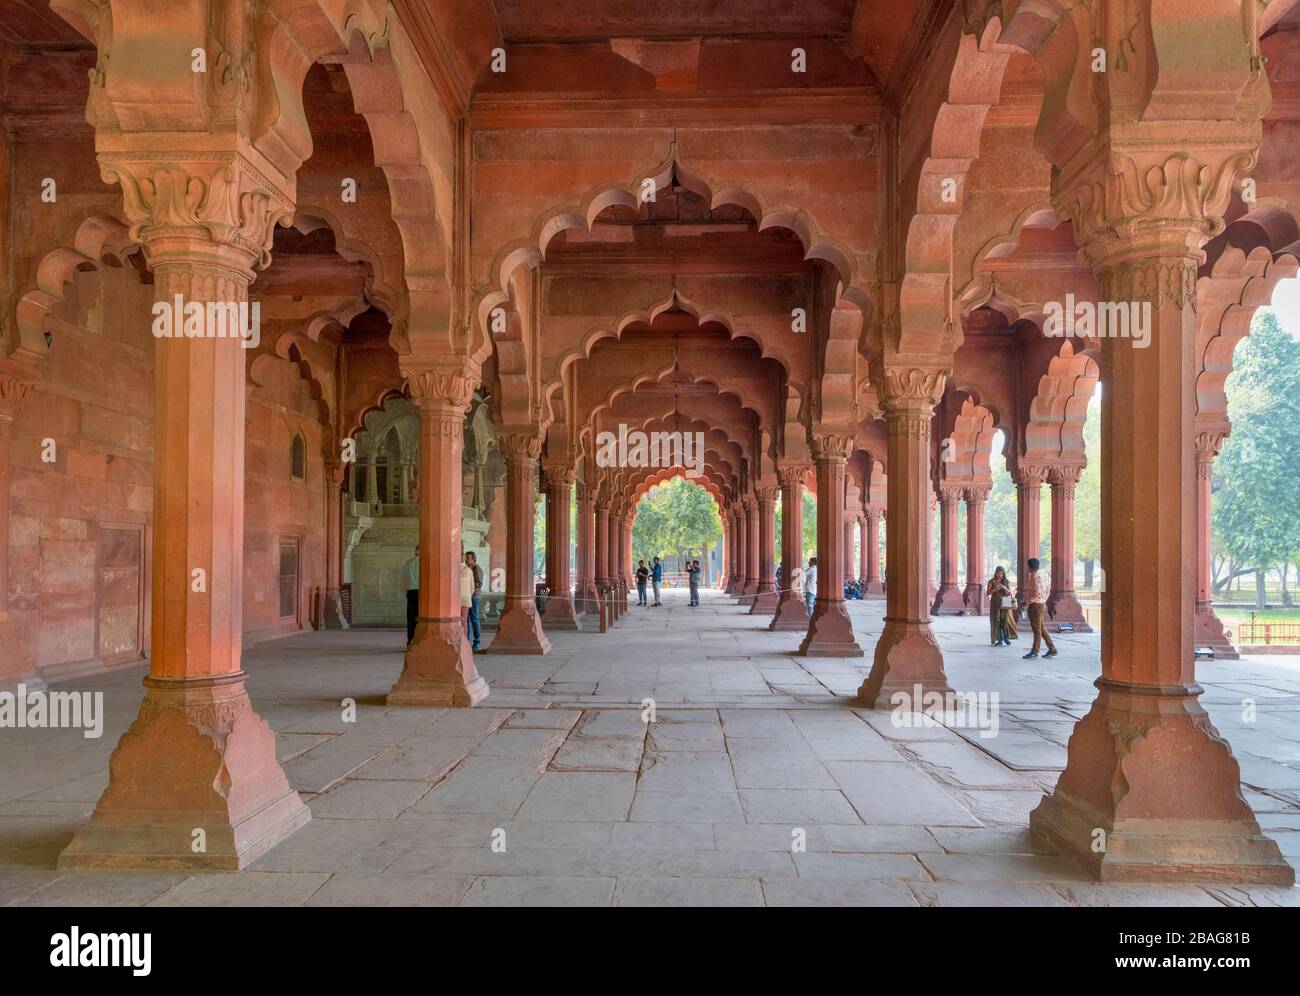 The Diwan-i-am (Hall of Public Audiences) in the Red Fort, Delhi, India Stock Photo